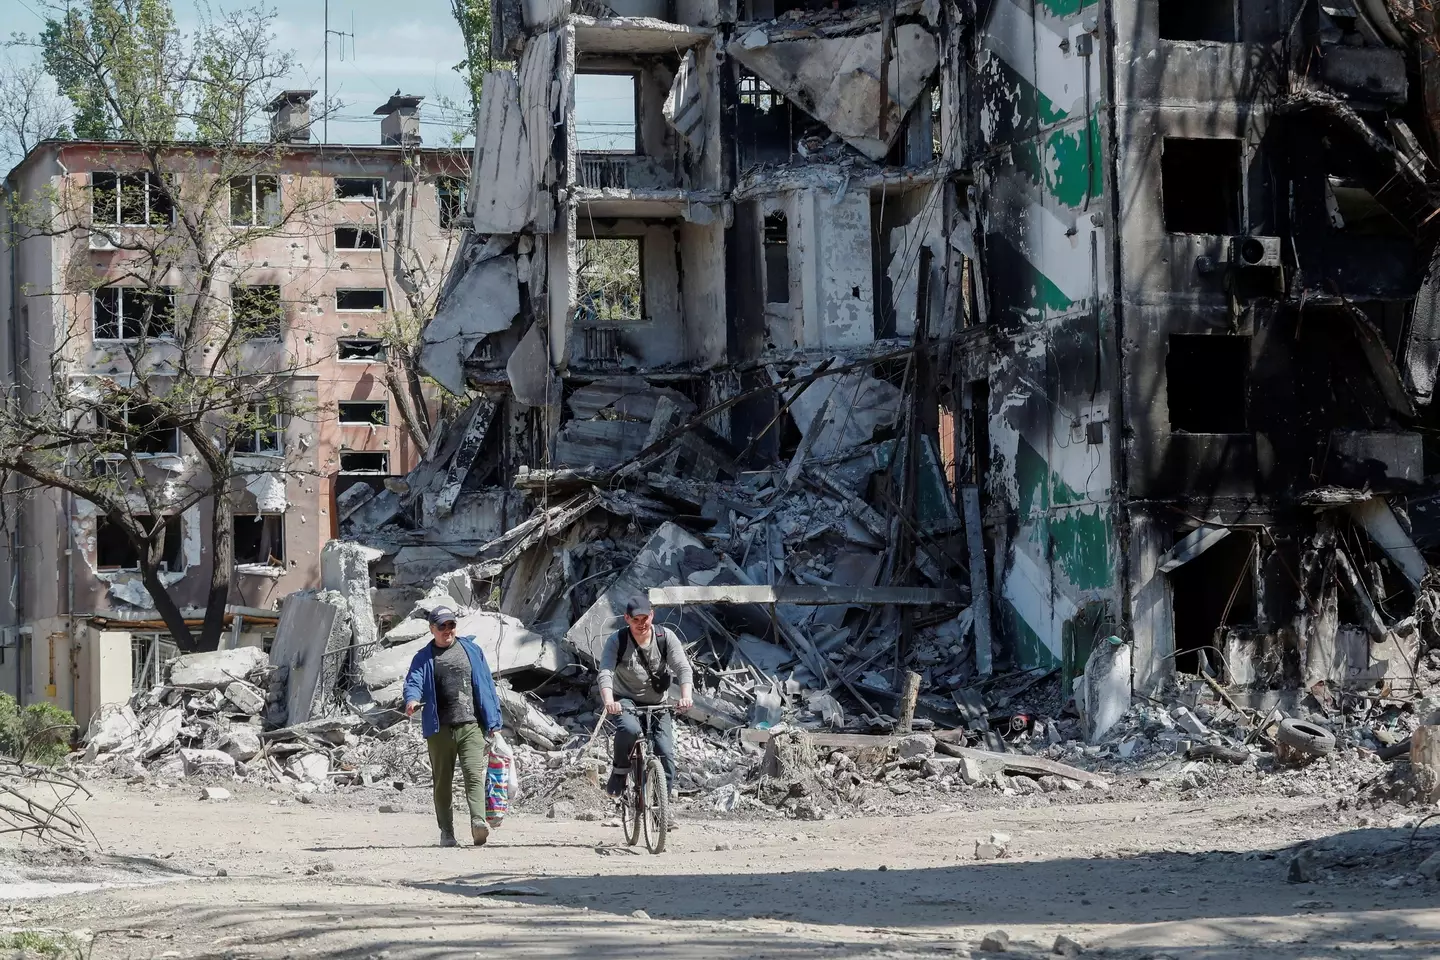 Mariupol has been left in rubble and despair.